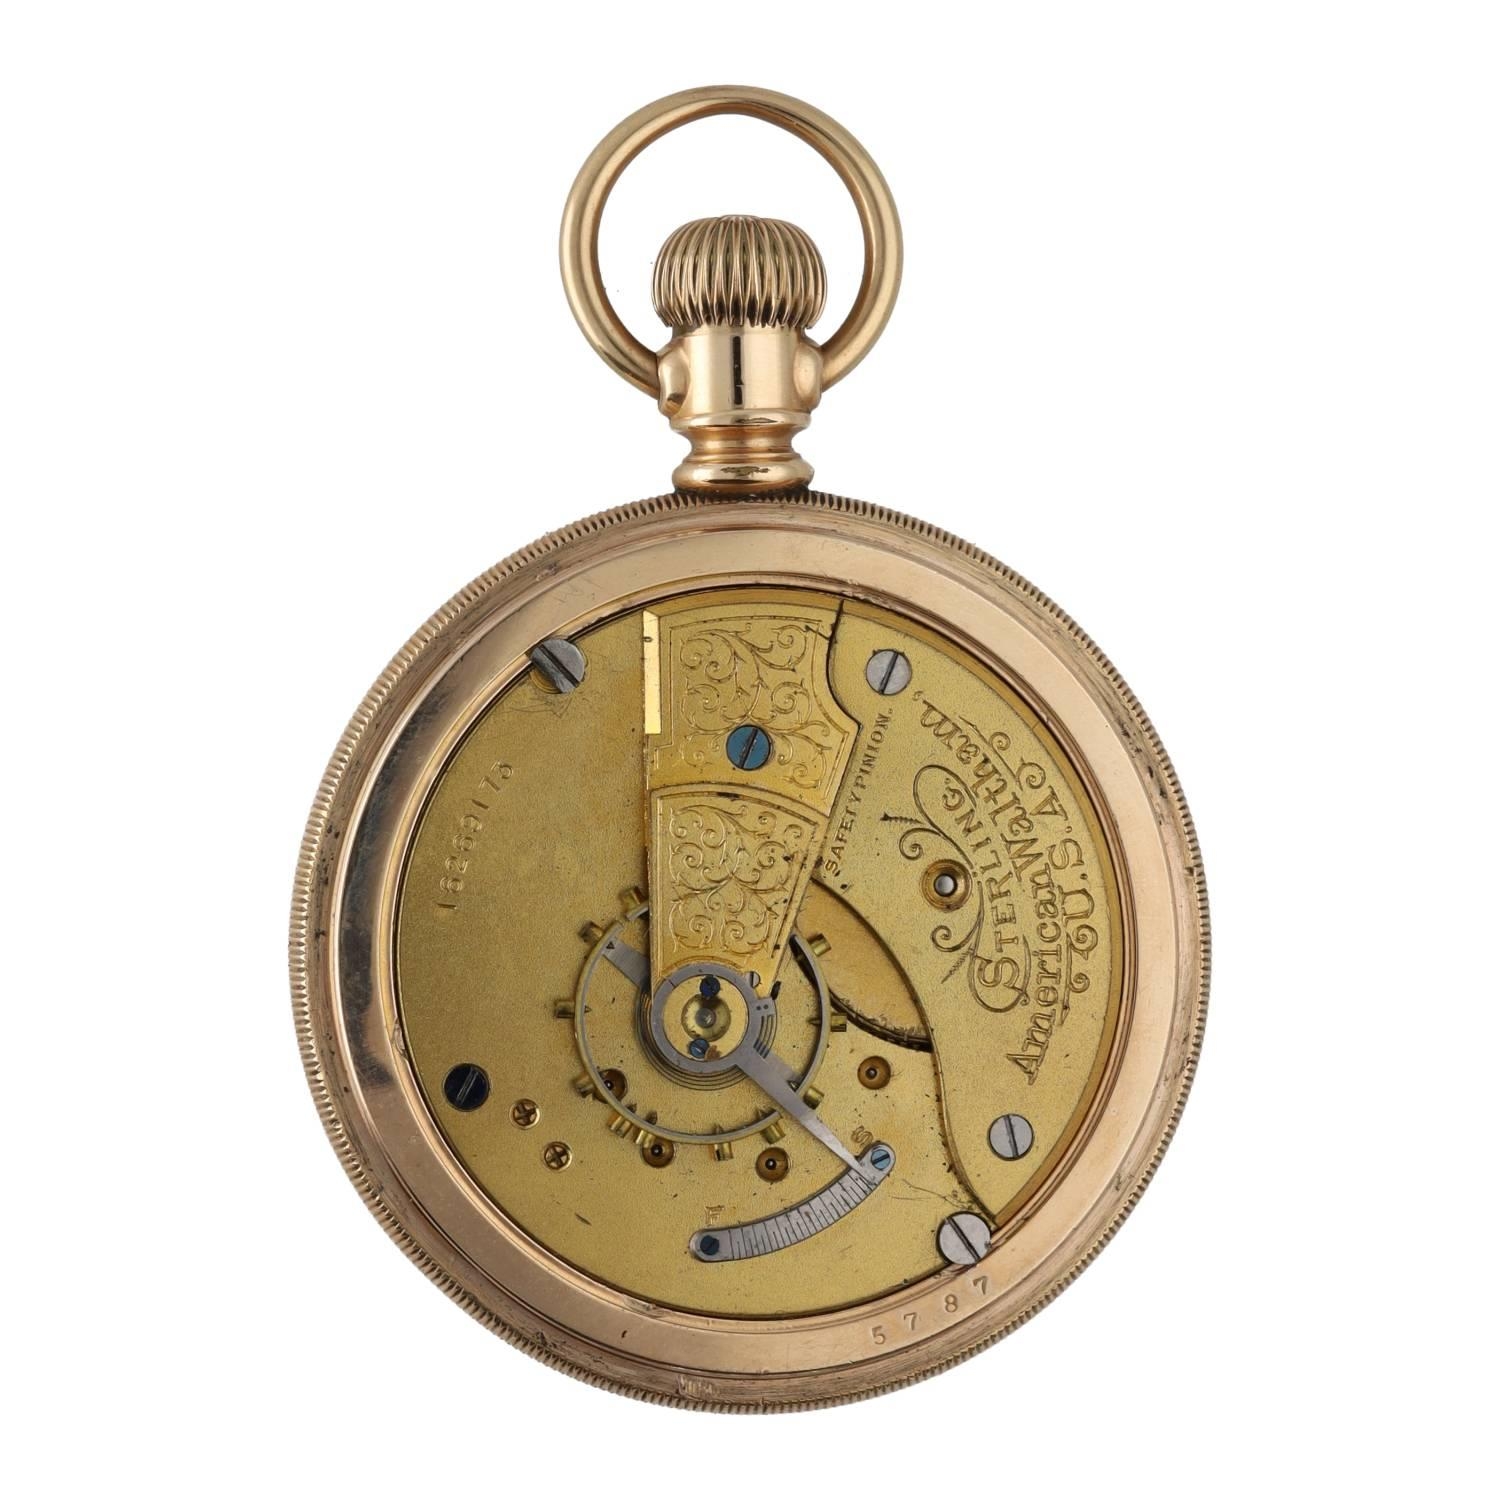 American Waltham 'Sterling' gold plated lever pocket watch, circa 1907, serial no. 16269173, - Image 3 of 4